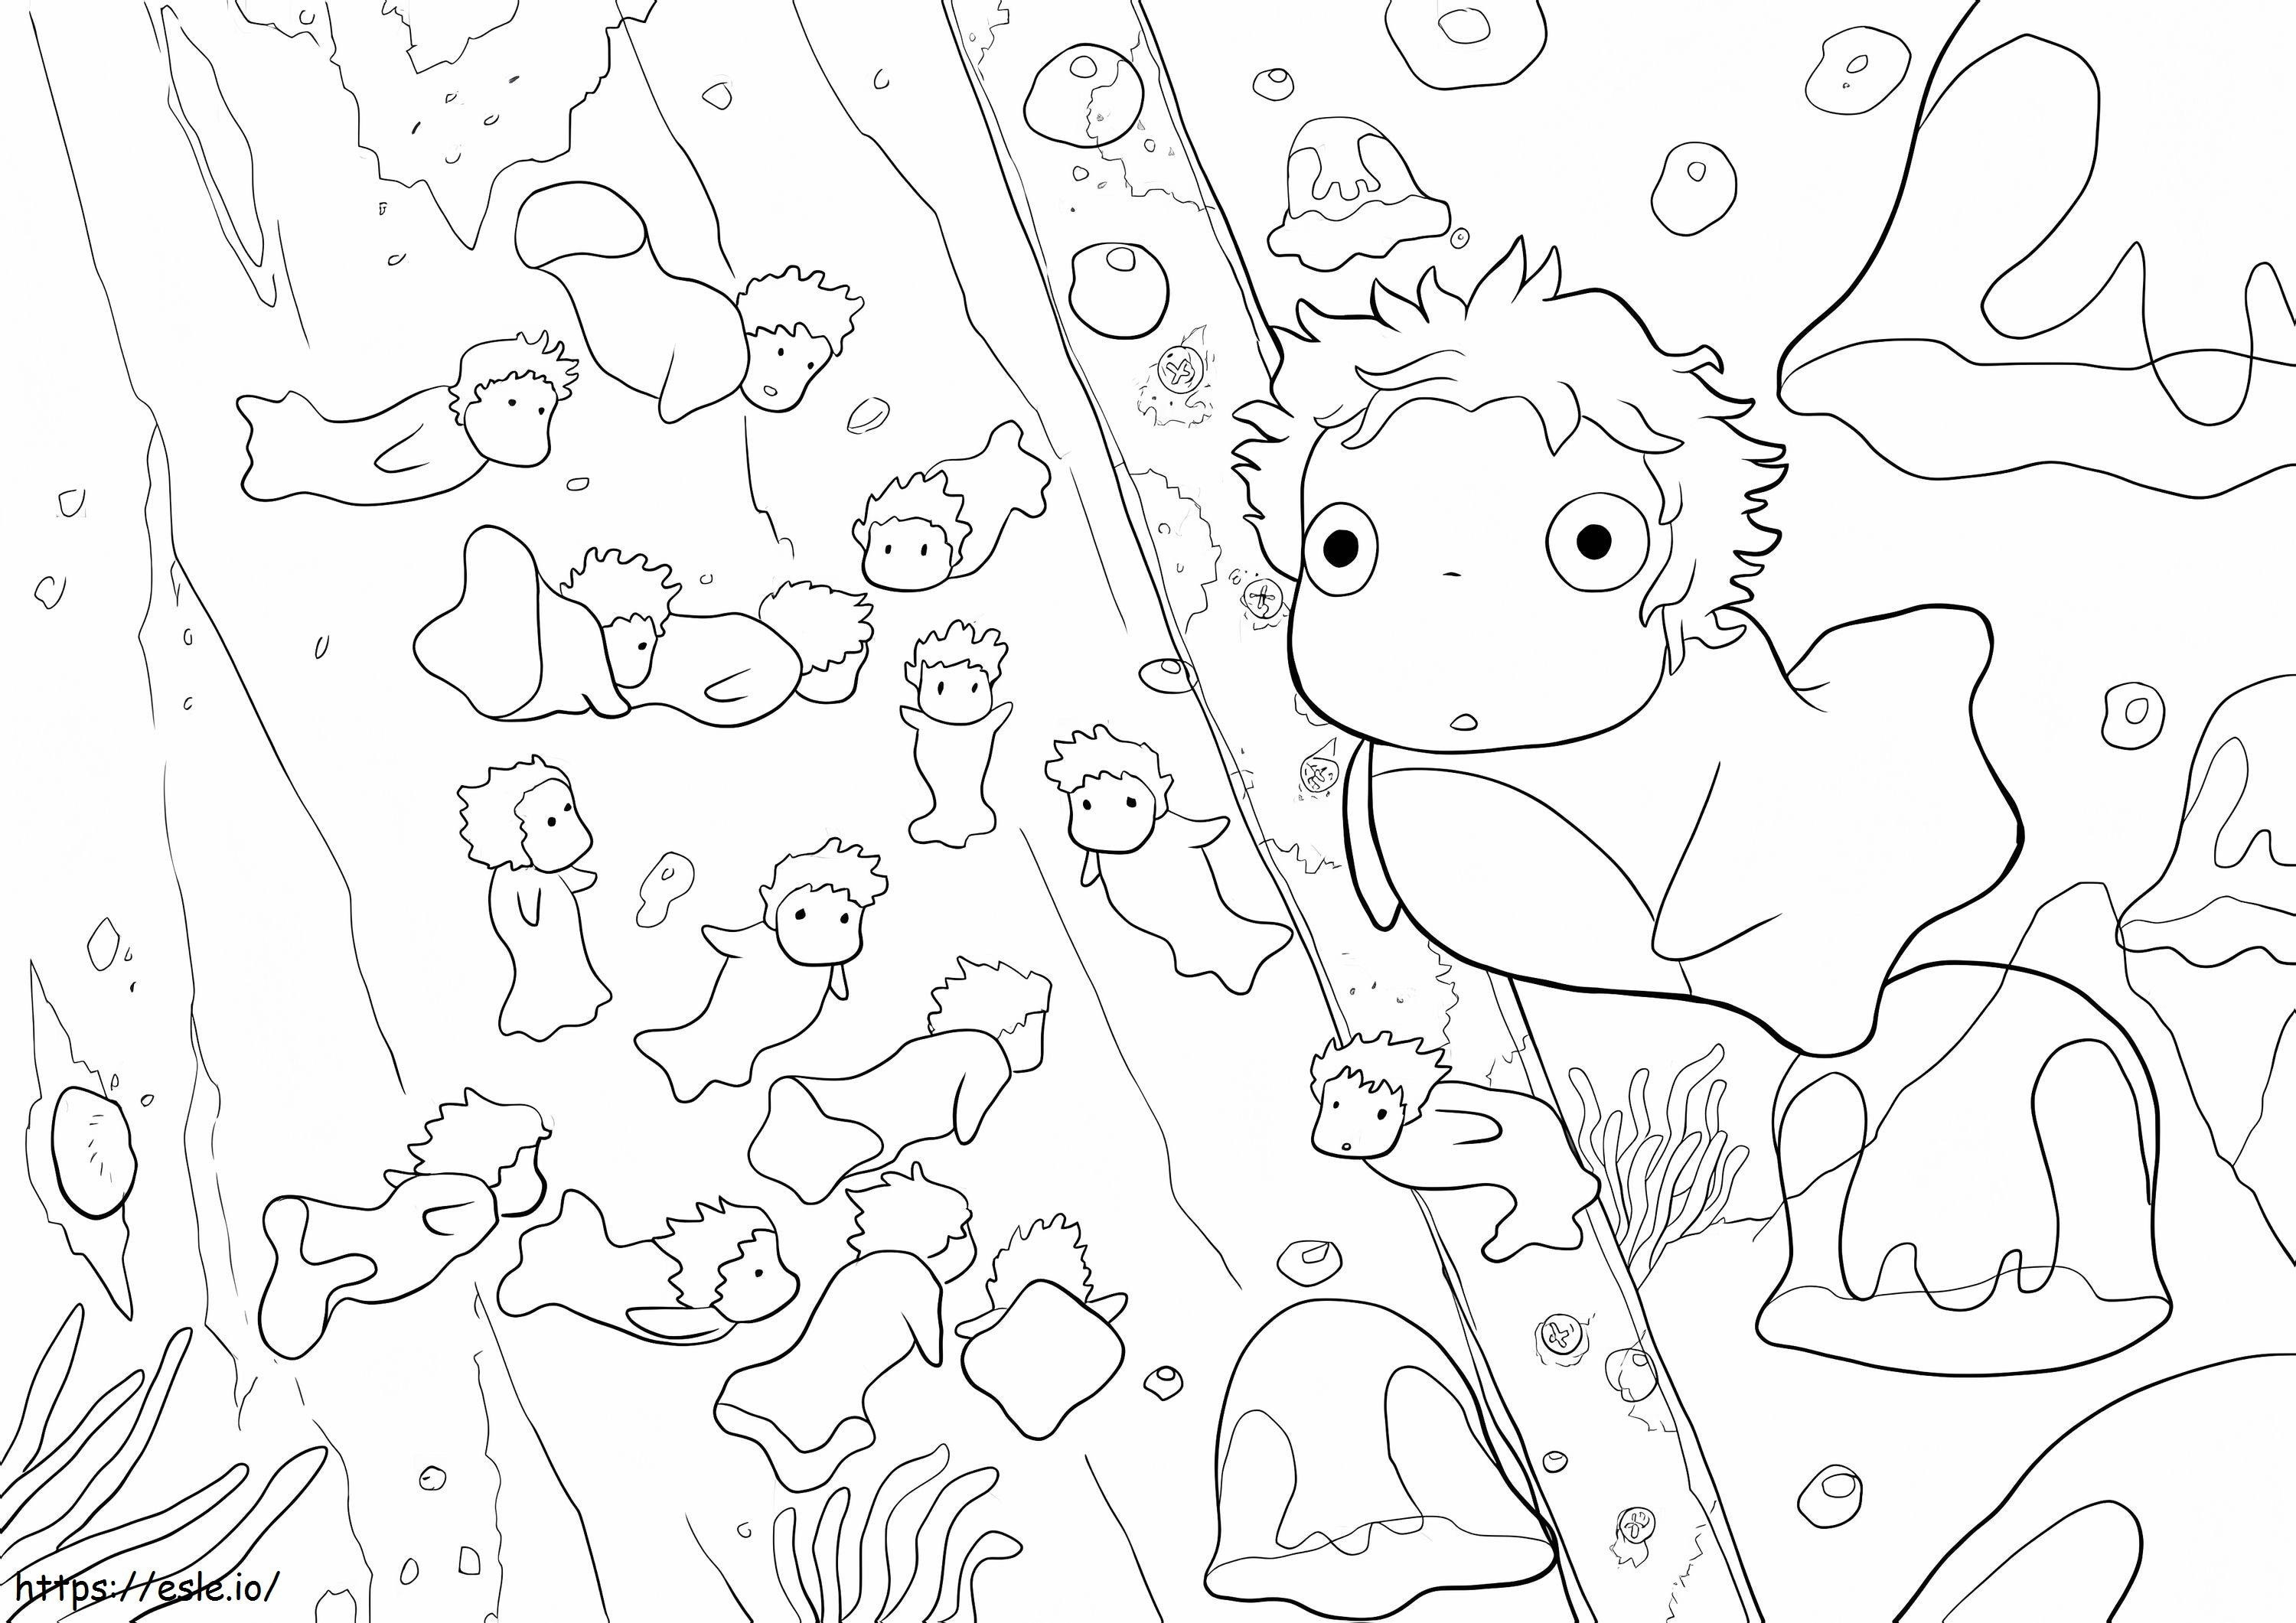 Little Ponyo coloring page